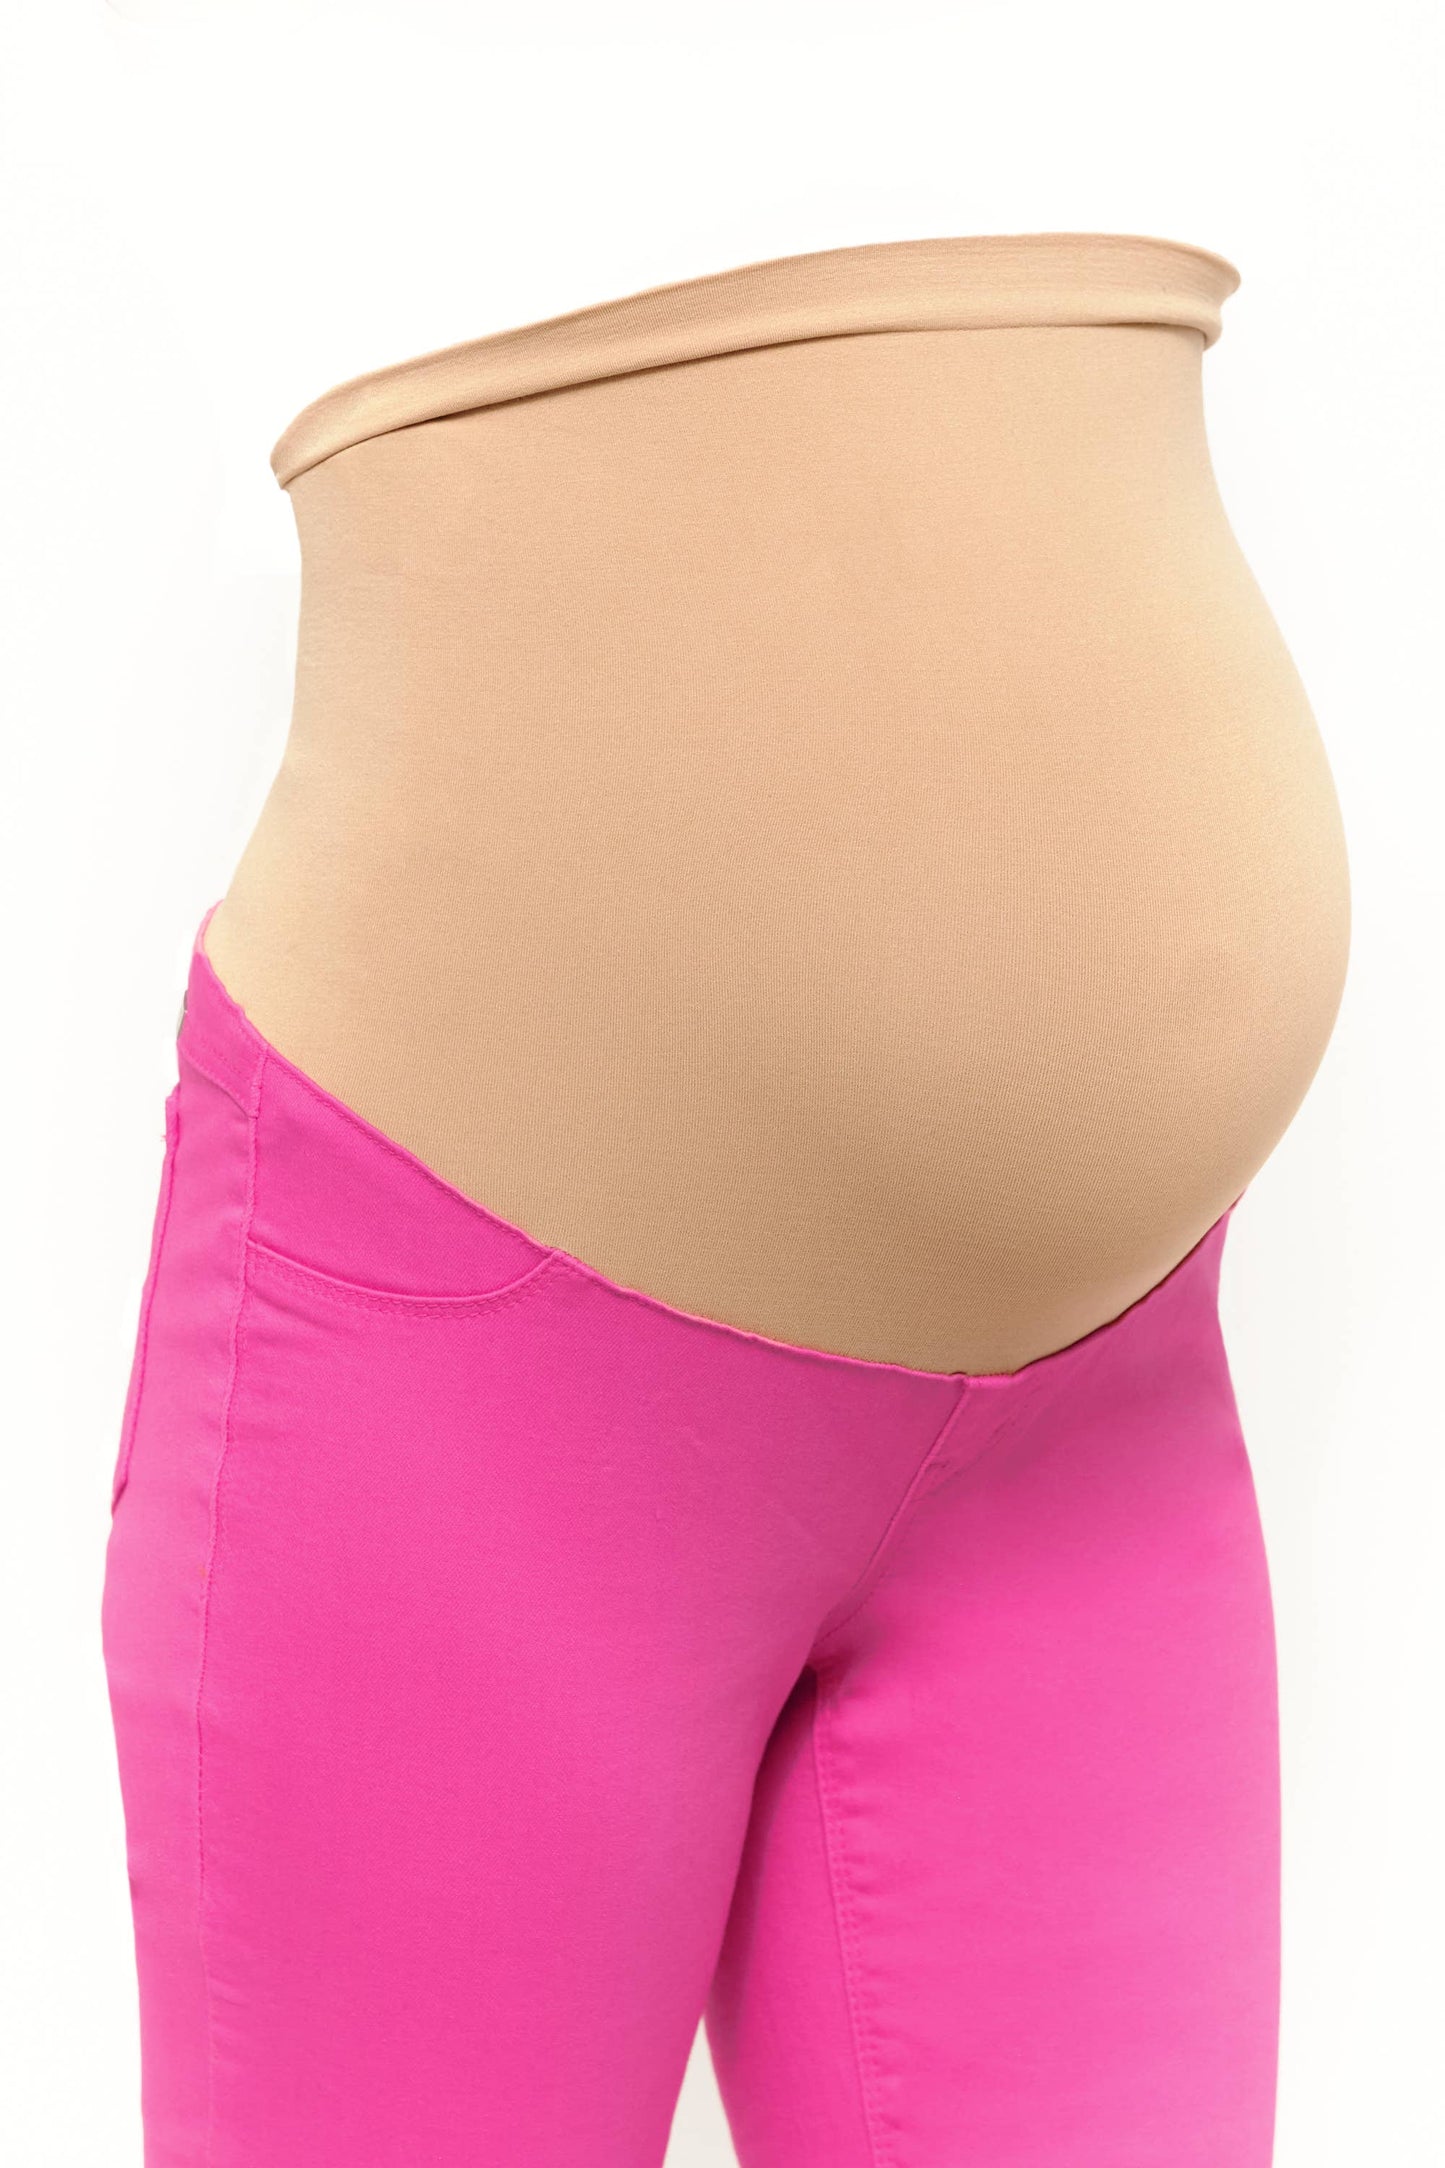 28" Maternity Luxe Skinny Jean w/ Bellyband in Pink Fade